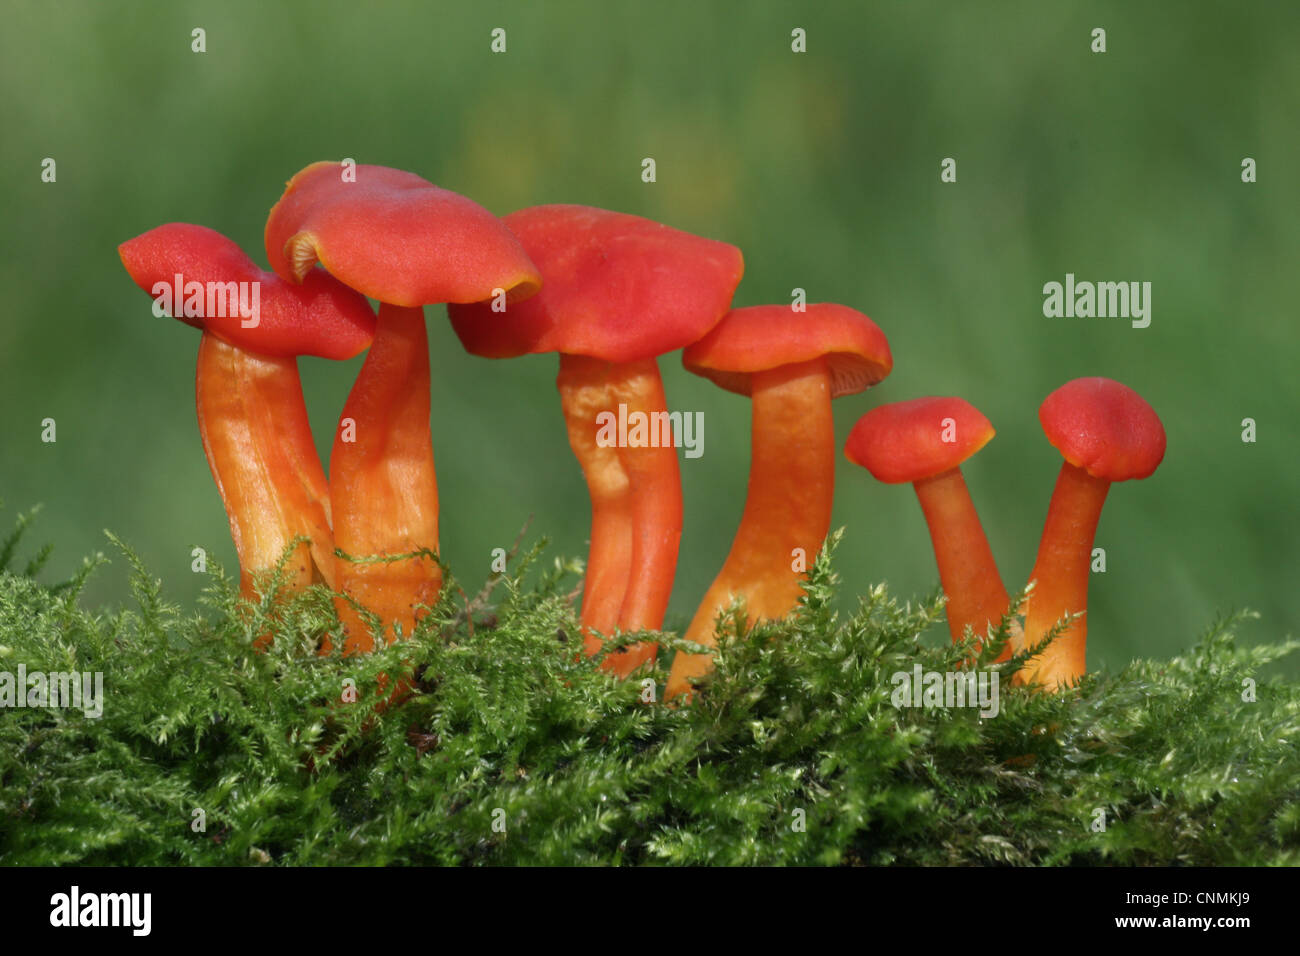 Scarlet Waxcap (Hygrocybe coccinea) fruiting bodies, growing amongst moss in meadow, Leicestershire, England, september Stock Photo